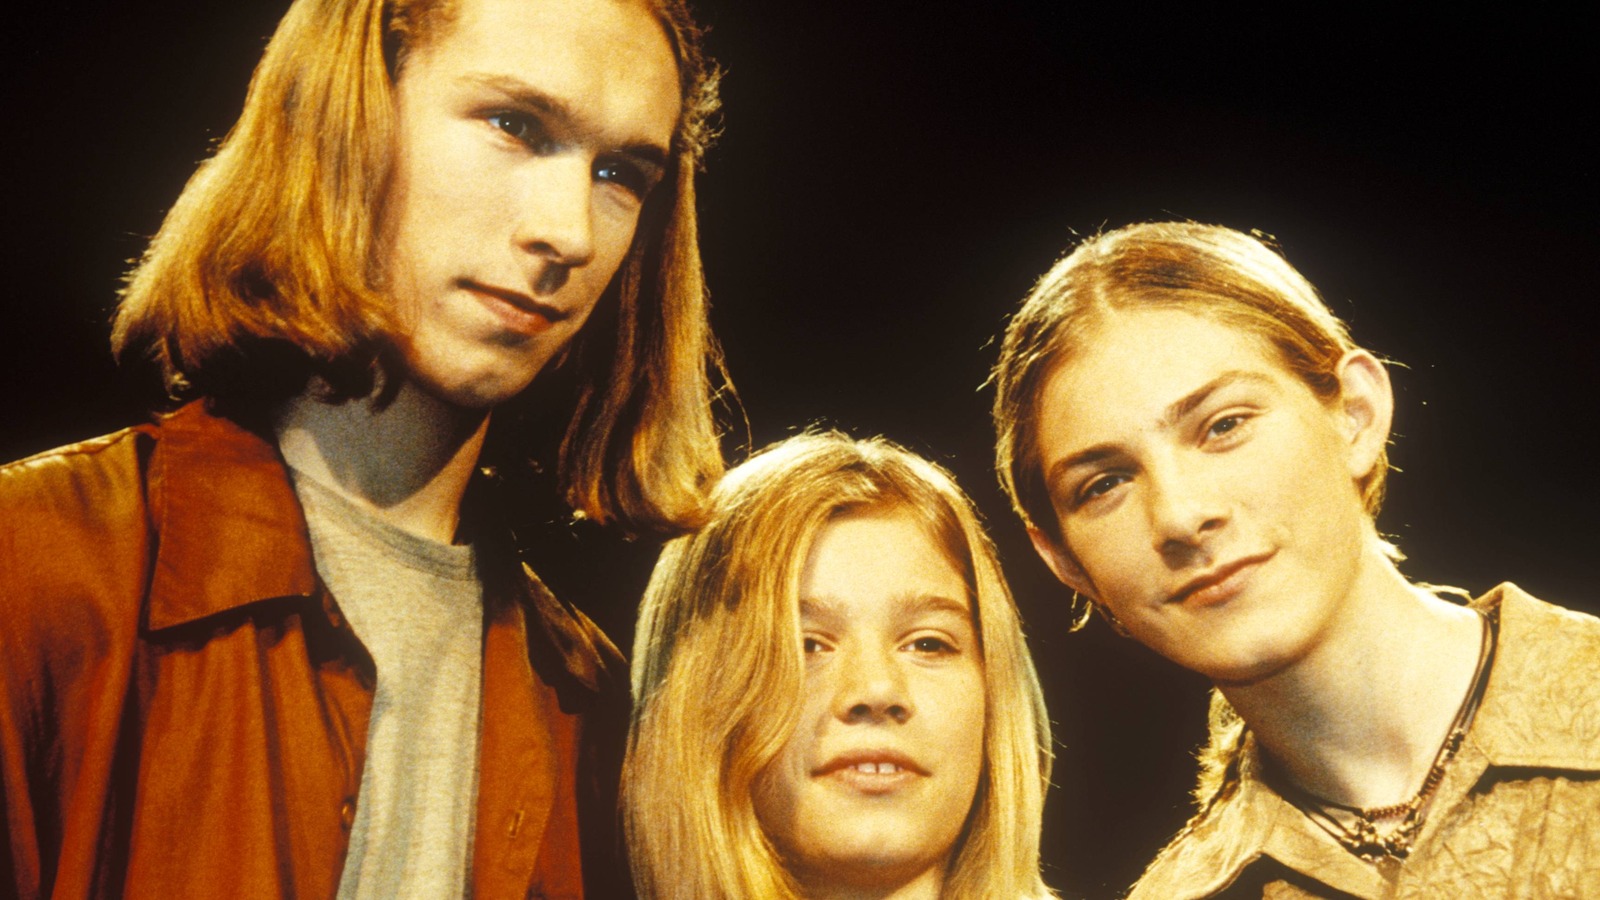 Hanson brothers reveal what their kids think of their '90s success